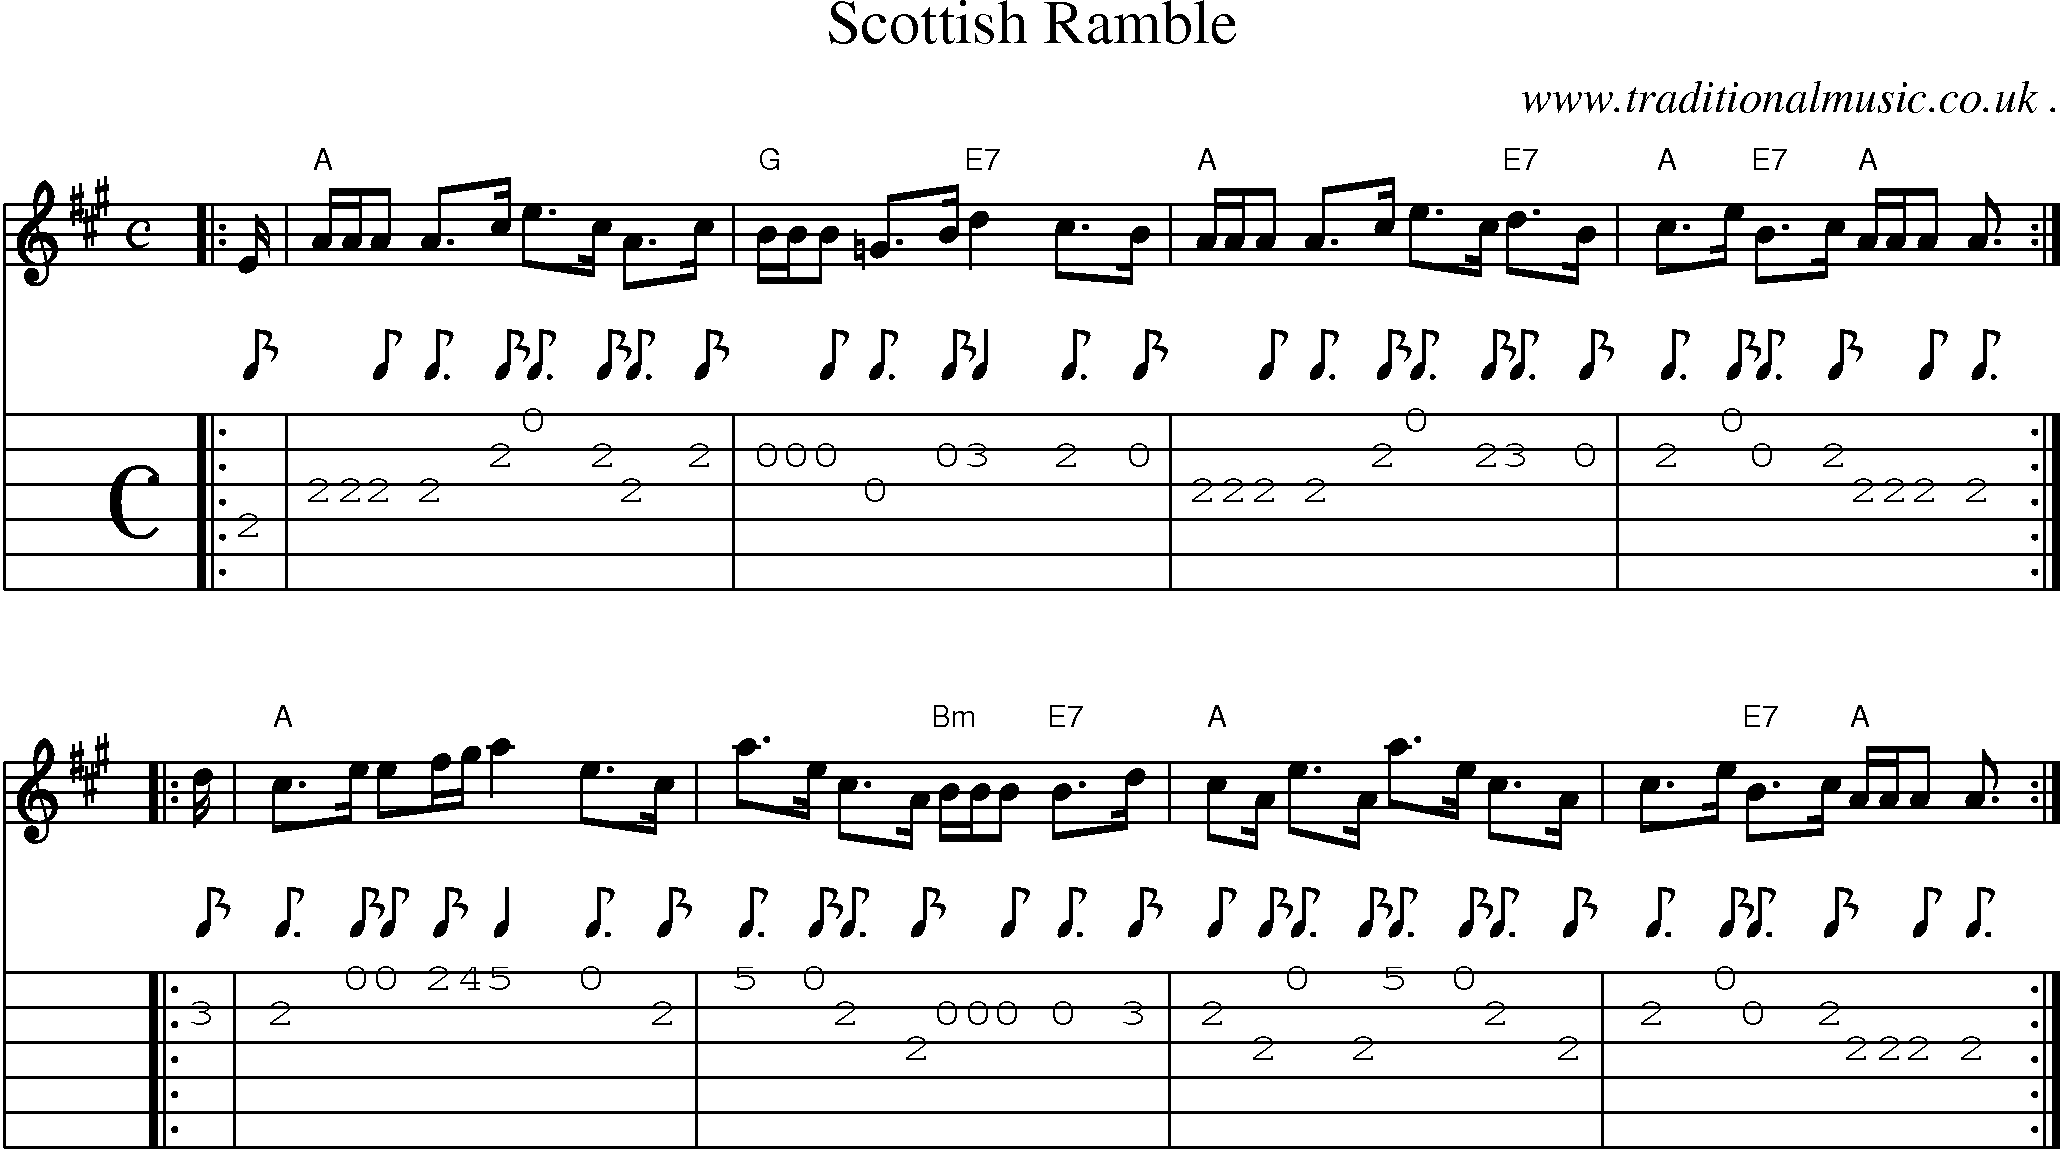 Sheet-music  score, Chords and Guitar Tabs for Scottish Ramble